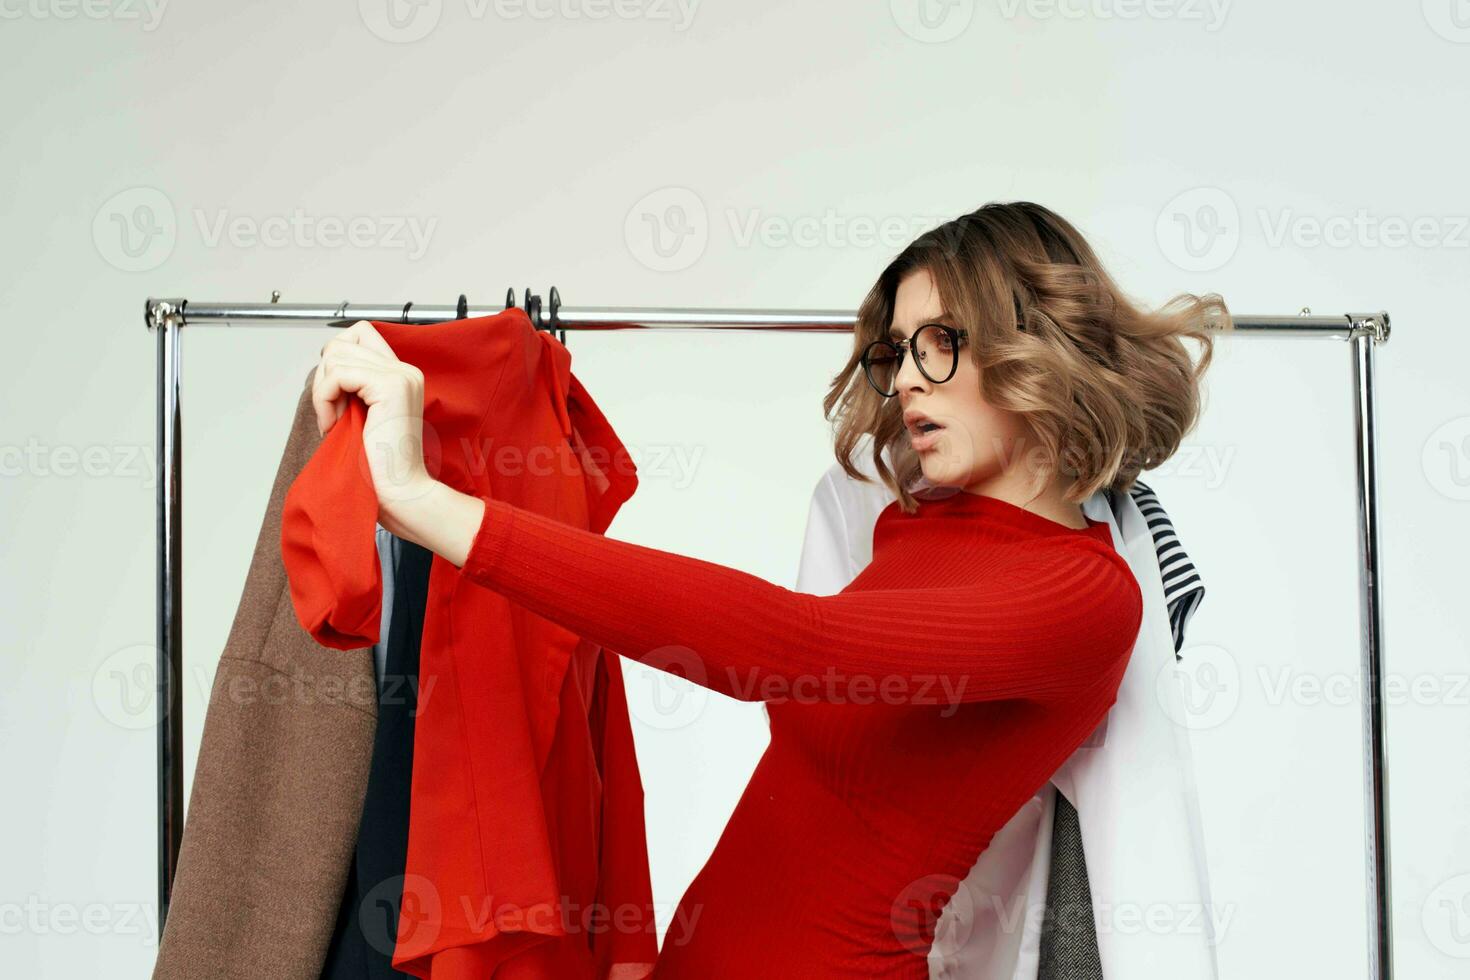 cheerful woman with glasses trying on clothes shop shopaholic emotions photo